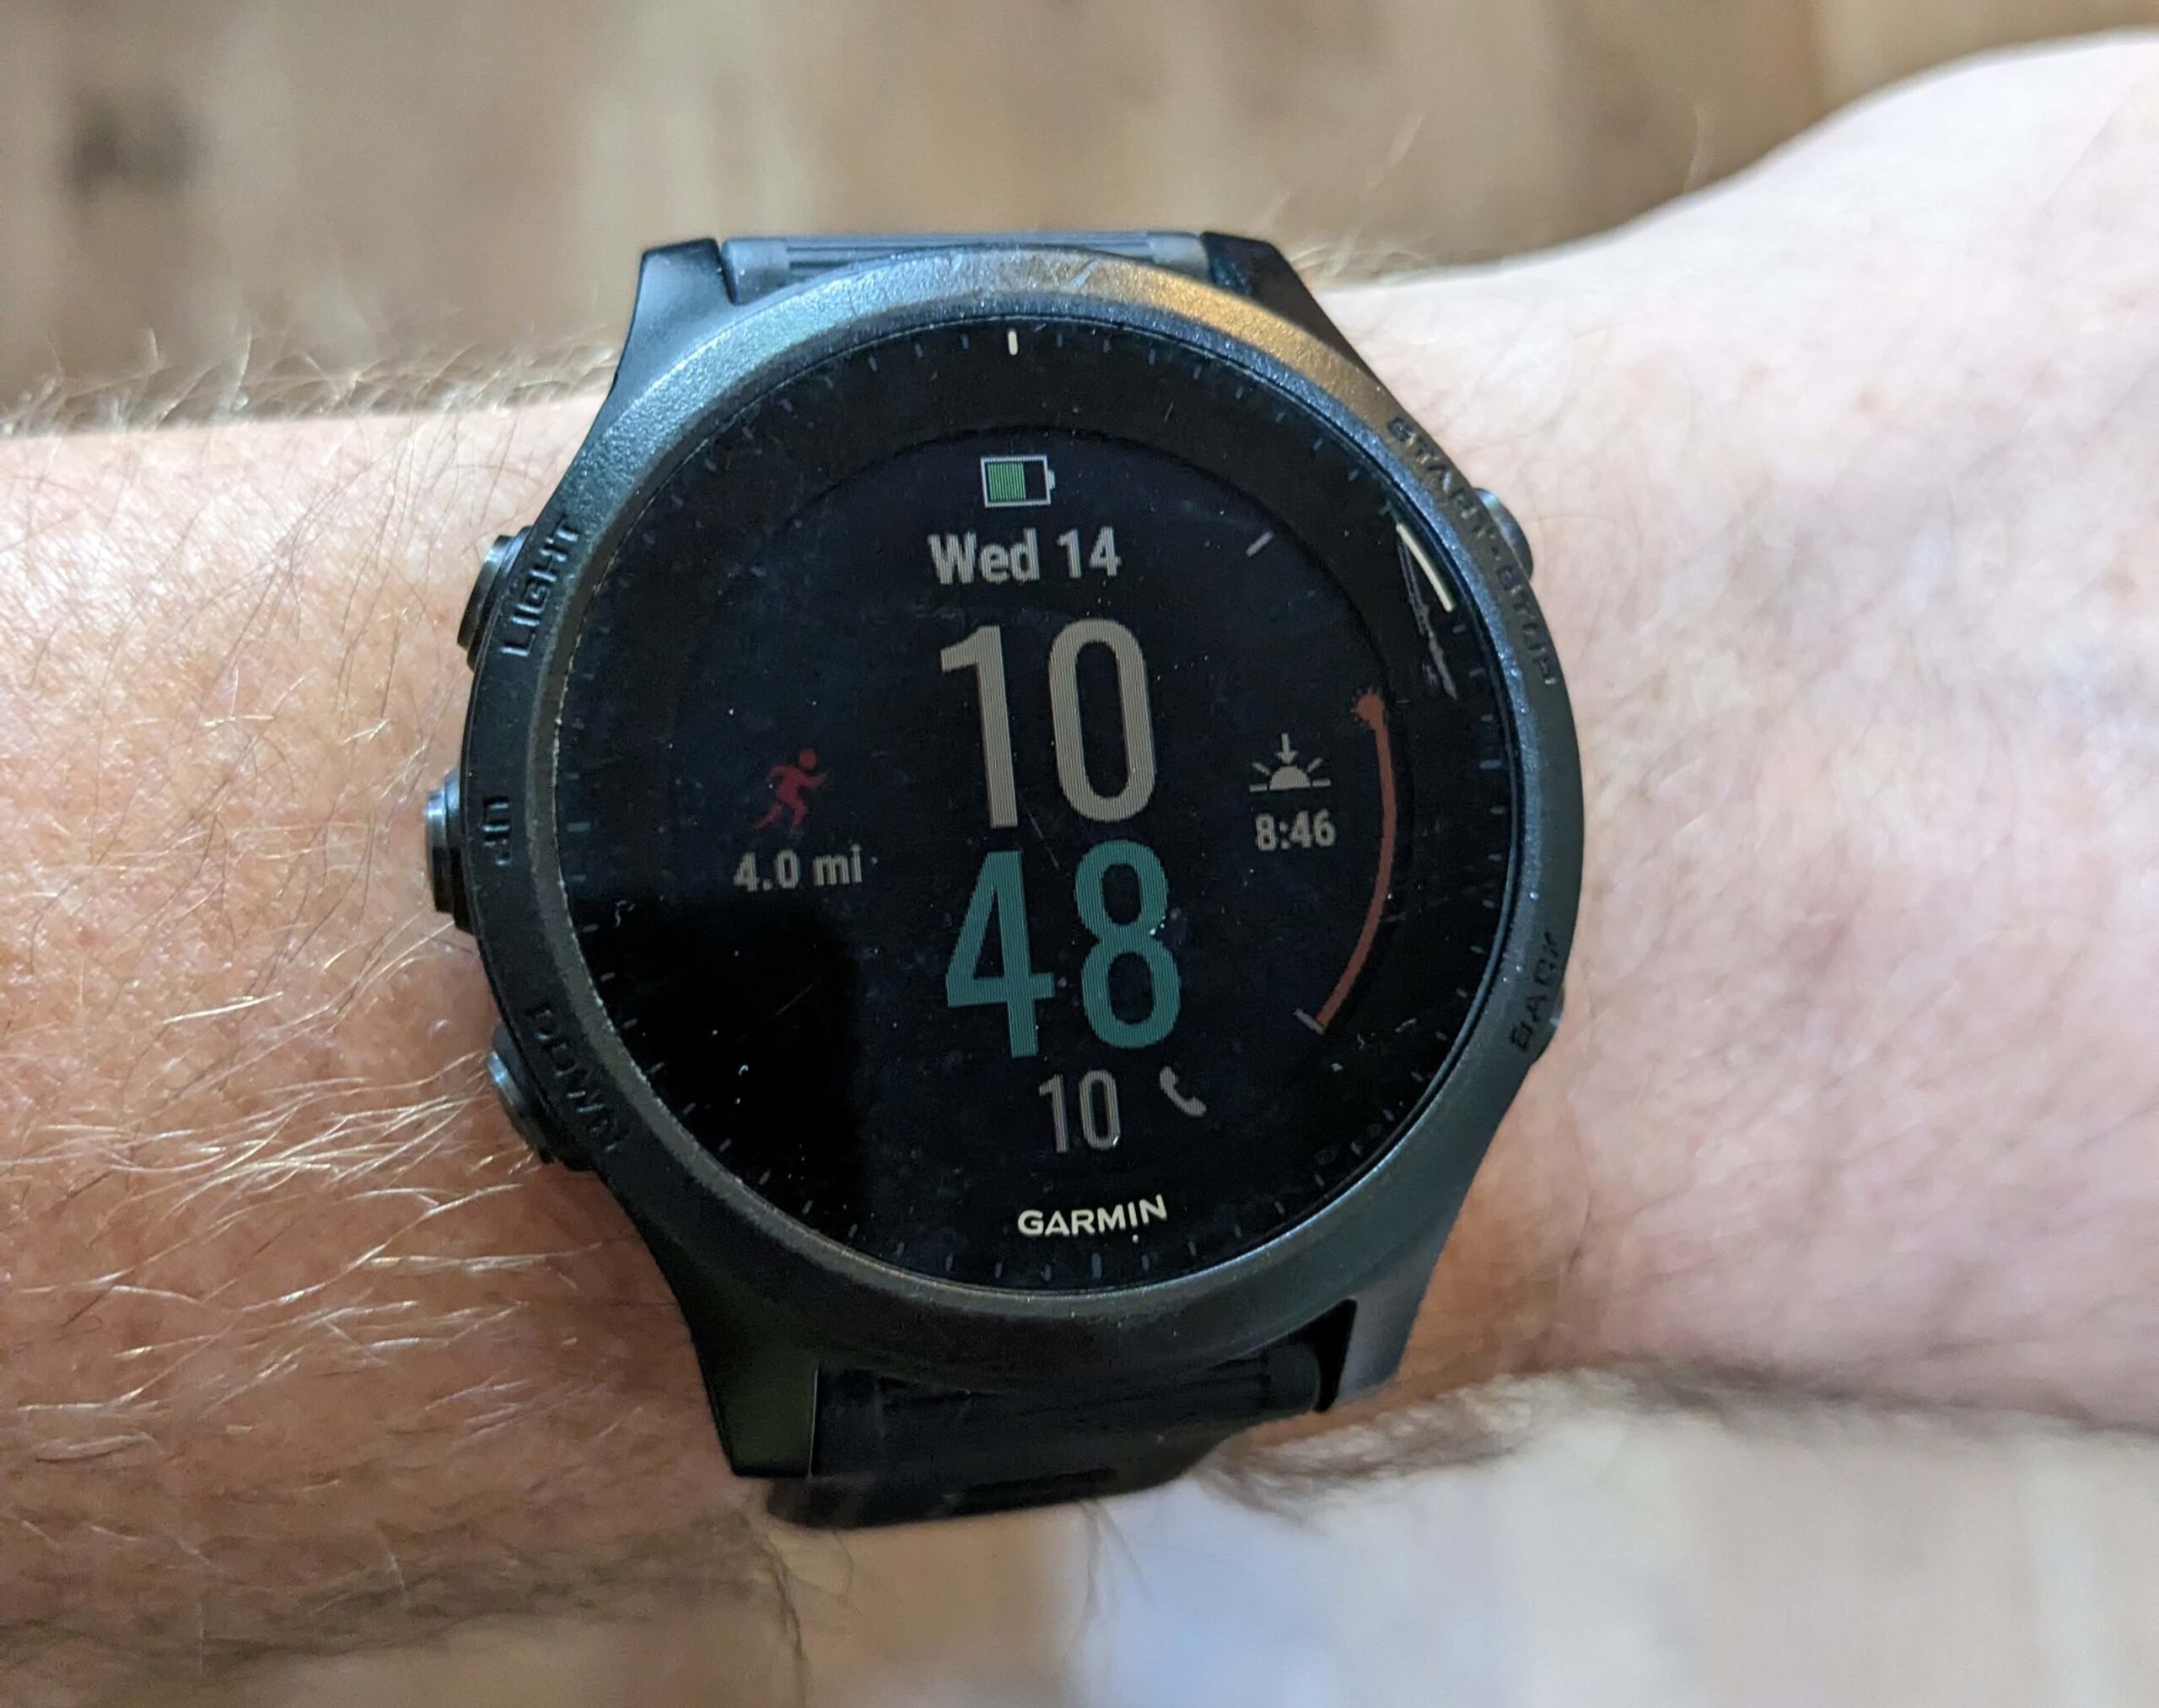 close up of GPS watch on an unusually handsome wrist